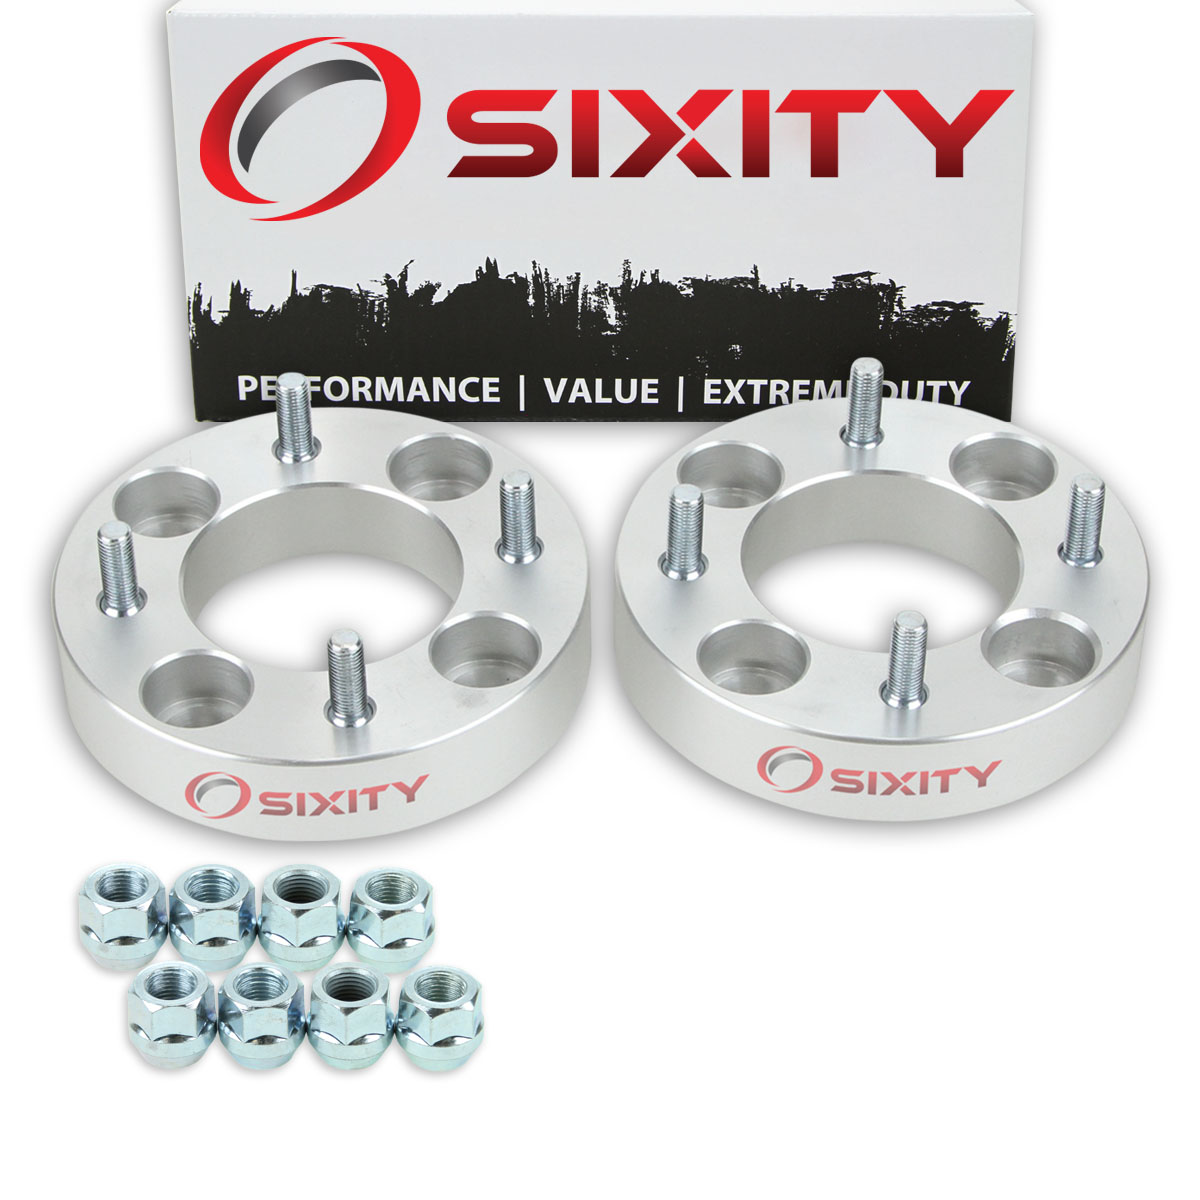 Sixity 2 pc 1.25 Inch Honda ATC 200X 250 250R Big Red 4/110 Rear Wheel Spacers